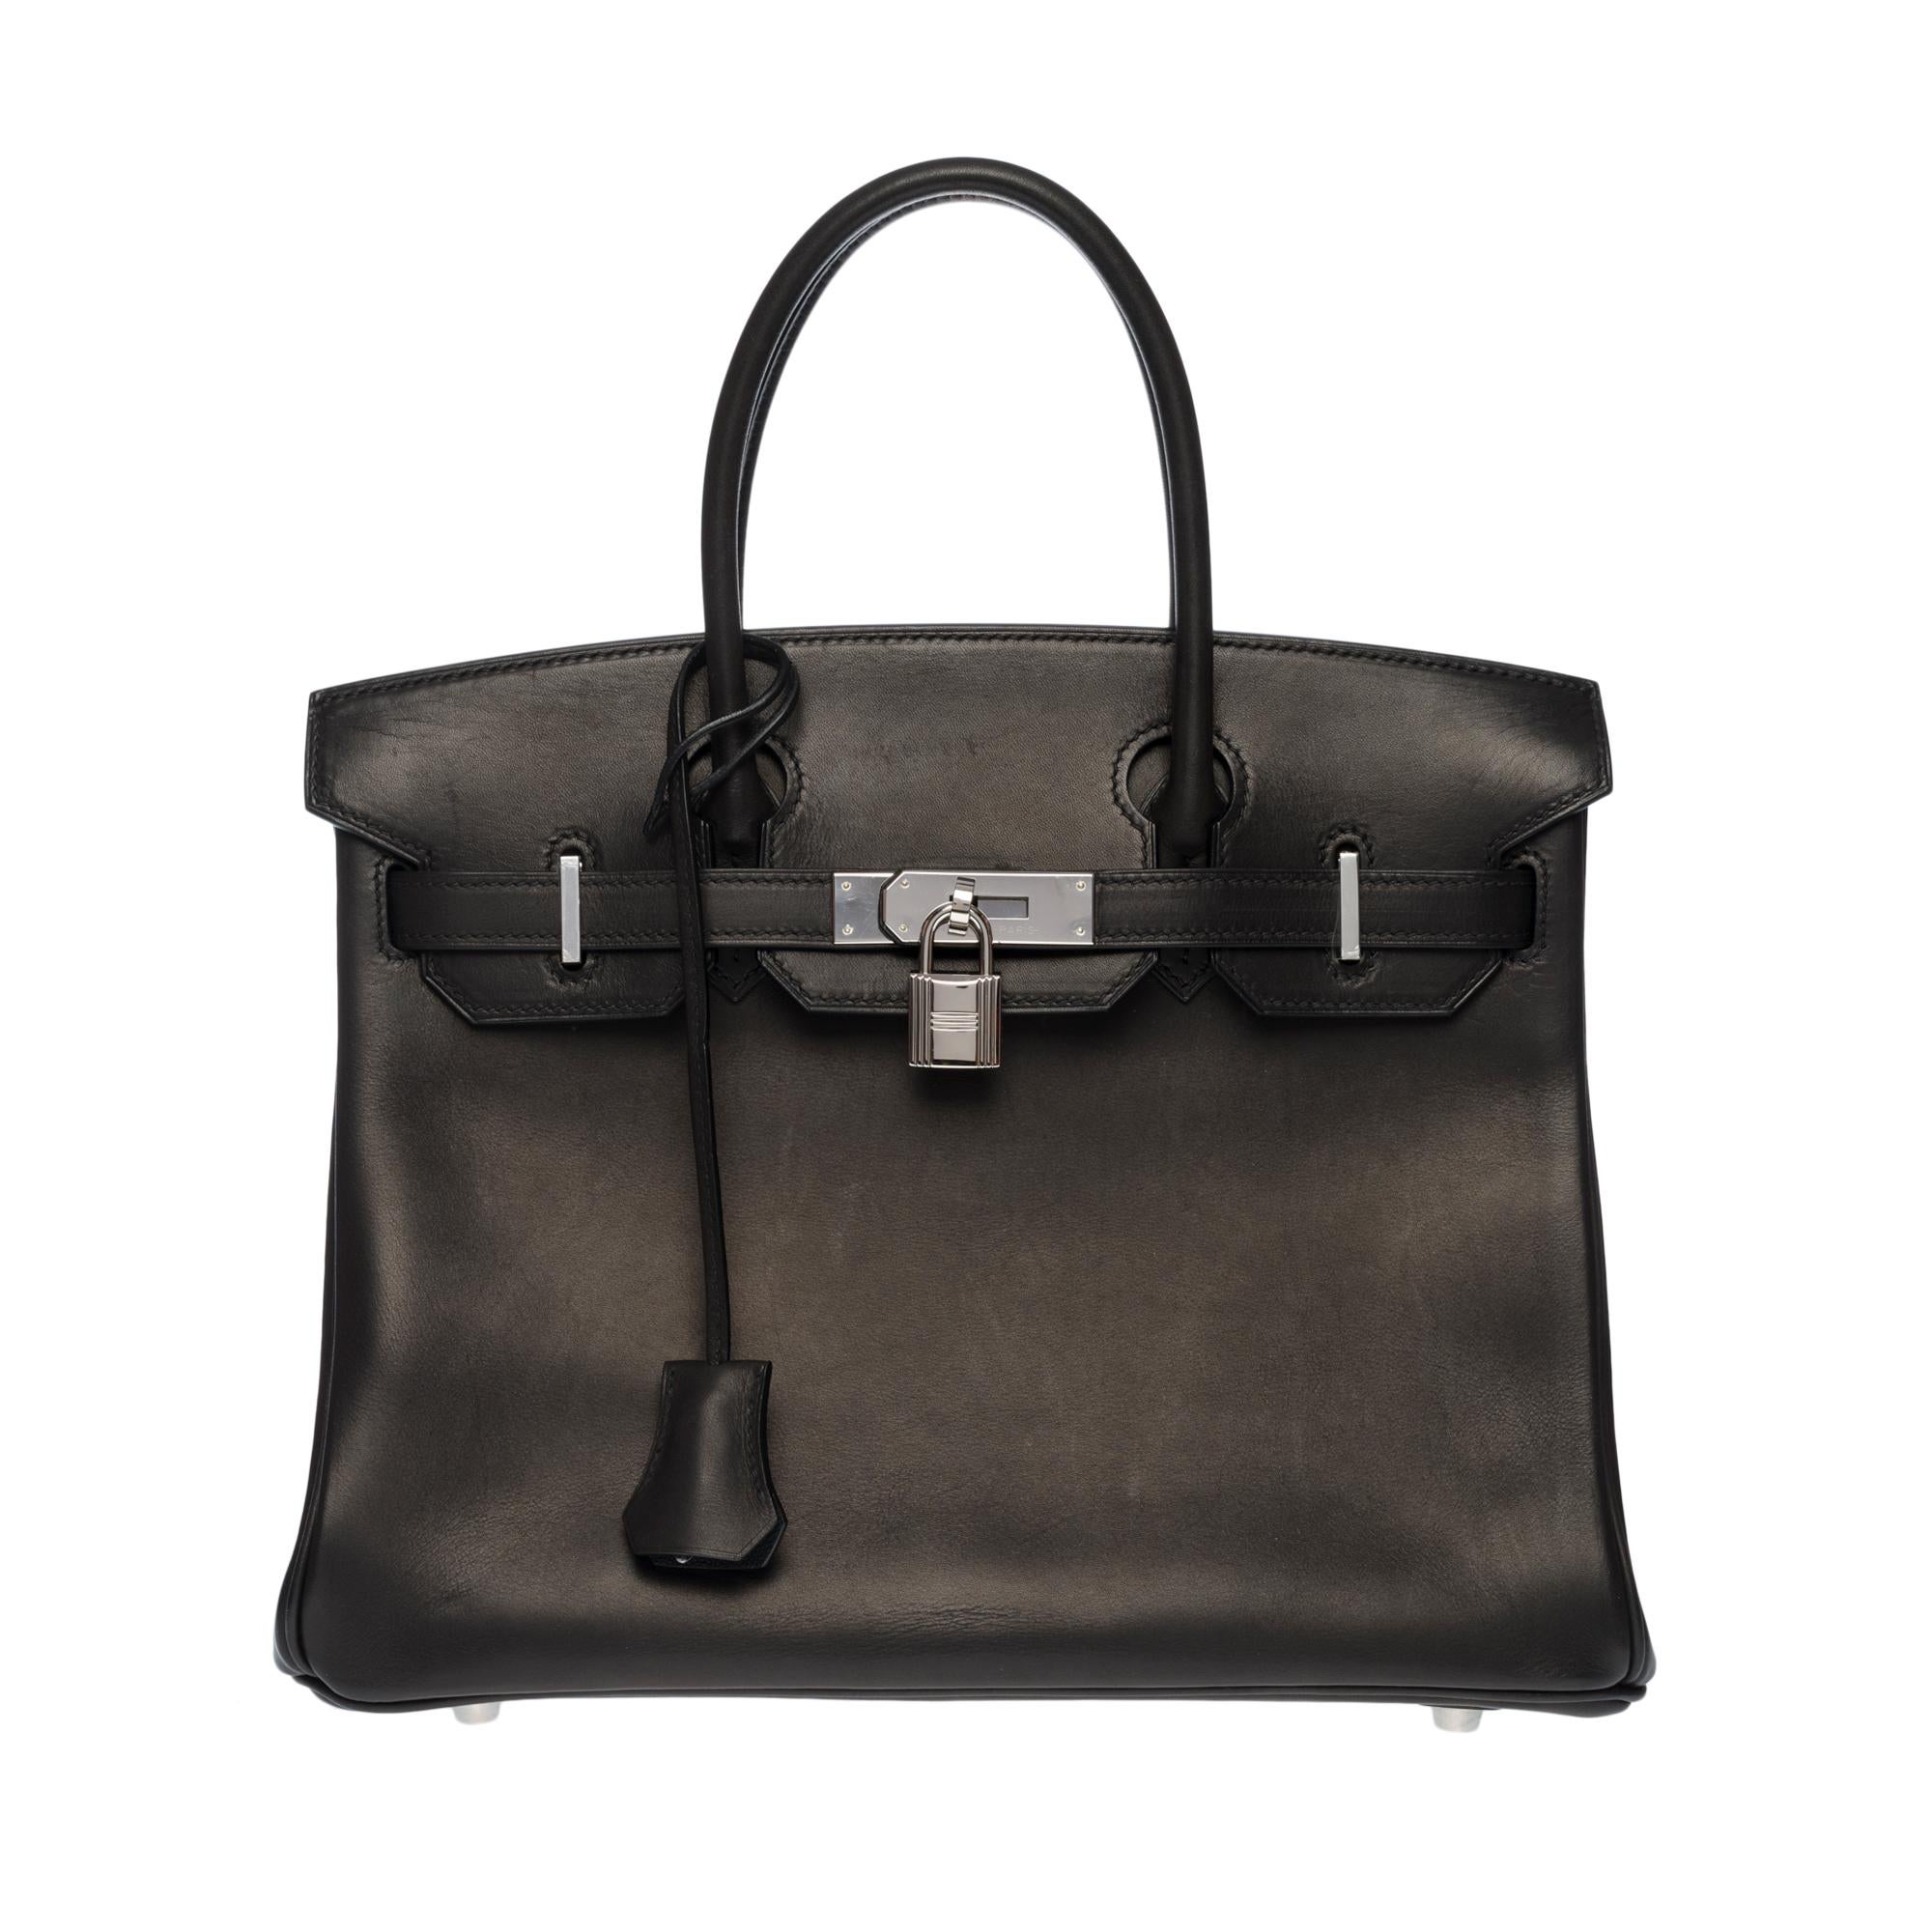 Exceptional & Rare Hermes Birkin 30 cm handbag in black Barenia leather, Palladium Silver Metal hardware, Double Black Leather Handle for Handwear

Flap closure
Black leather inner lining
A zipped pocket, a patch pocket
Signature: 